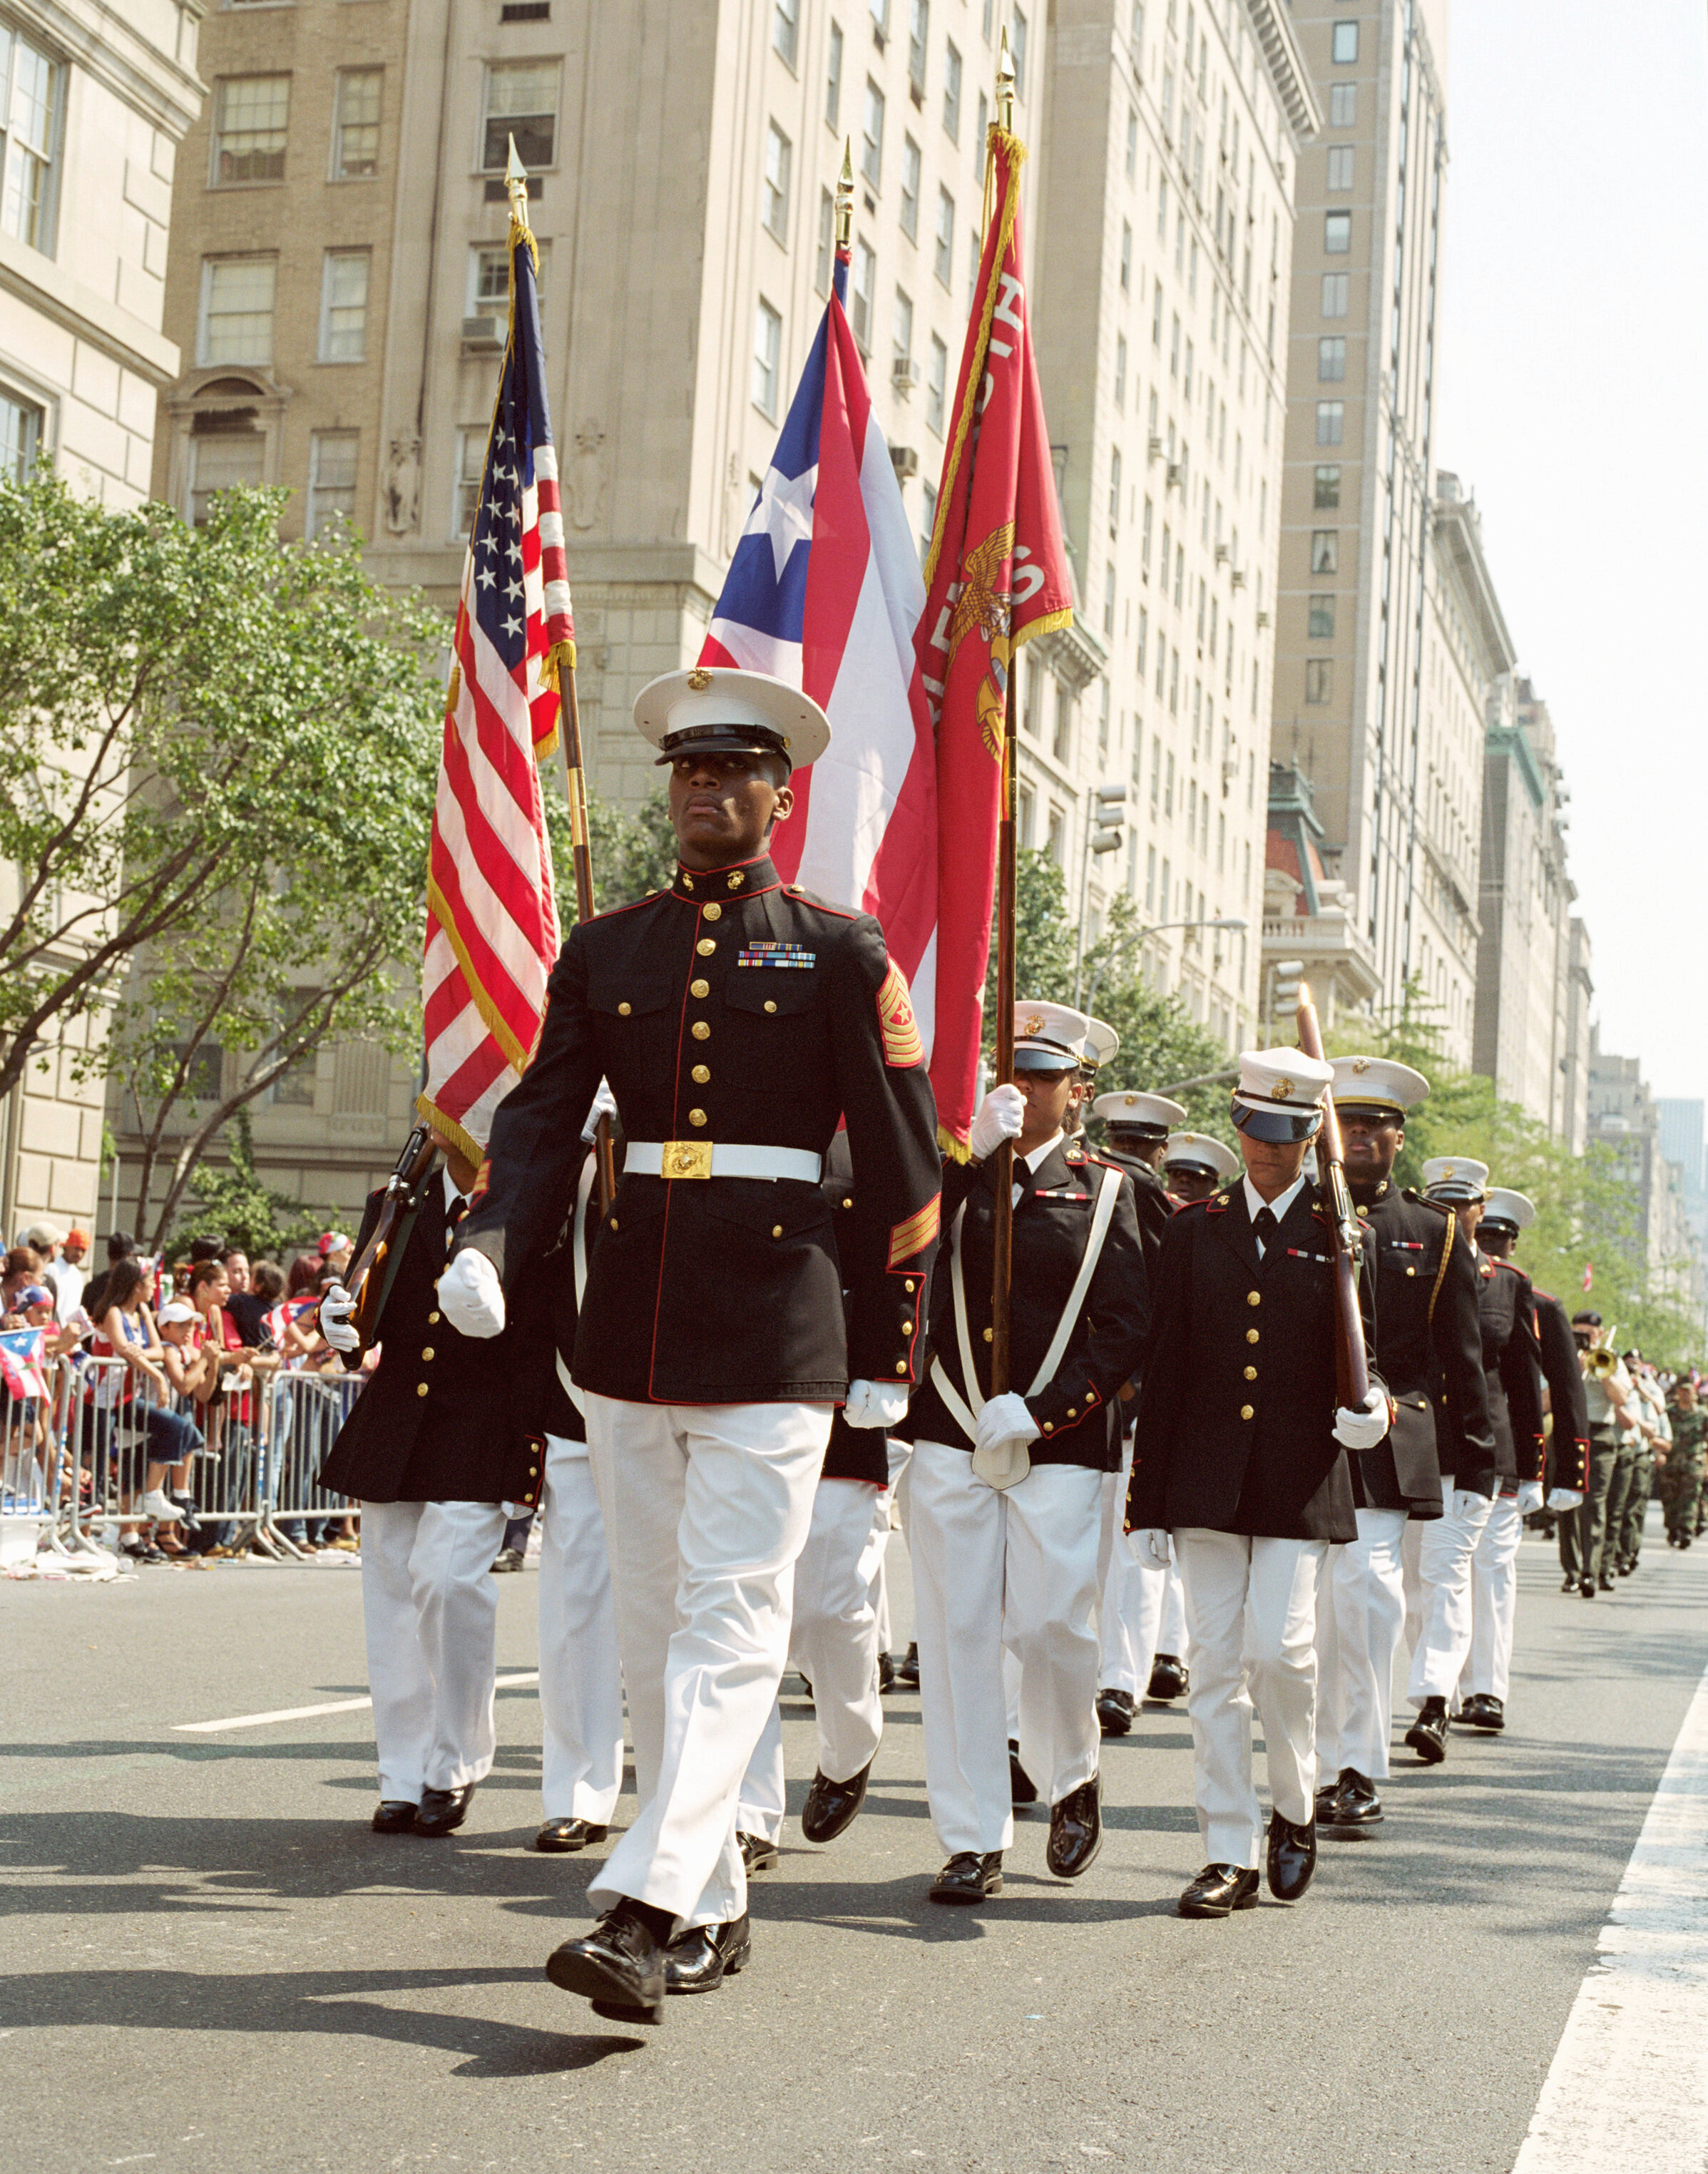  Puerto Rican Day Parade on Fifth Avenue in New York City 